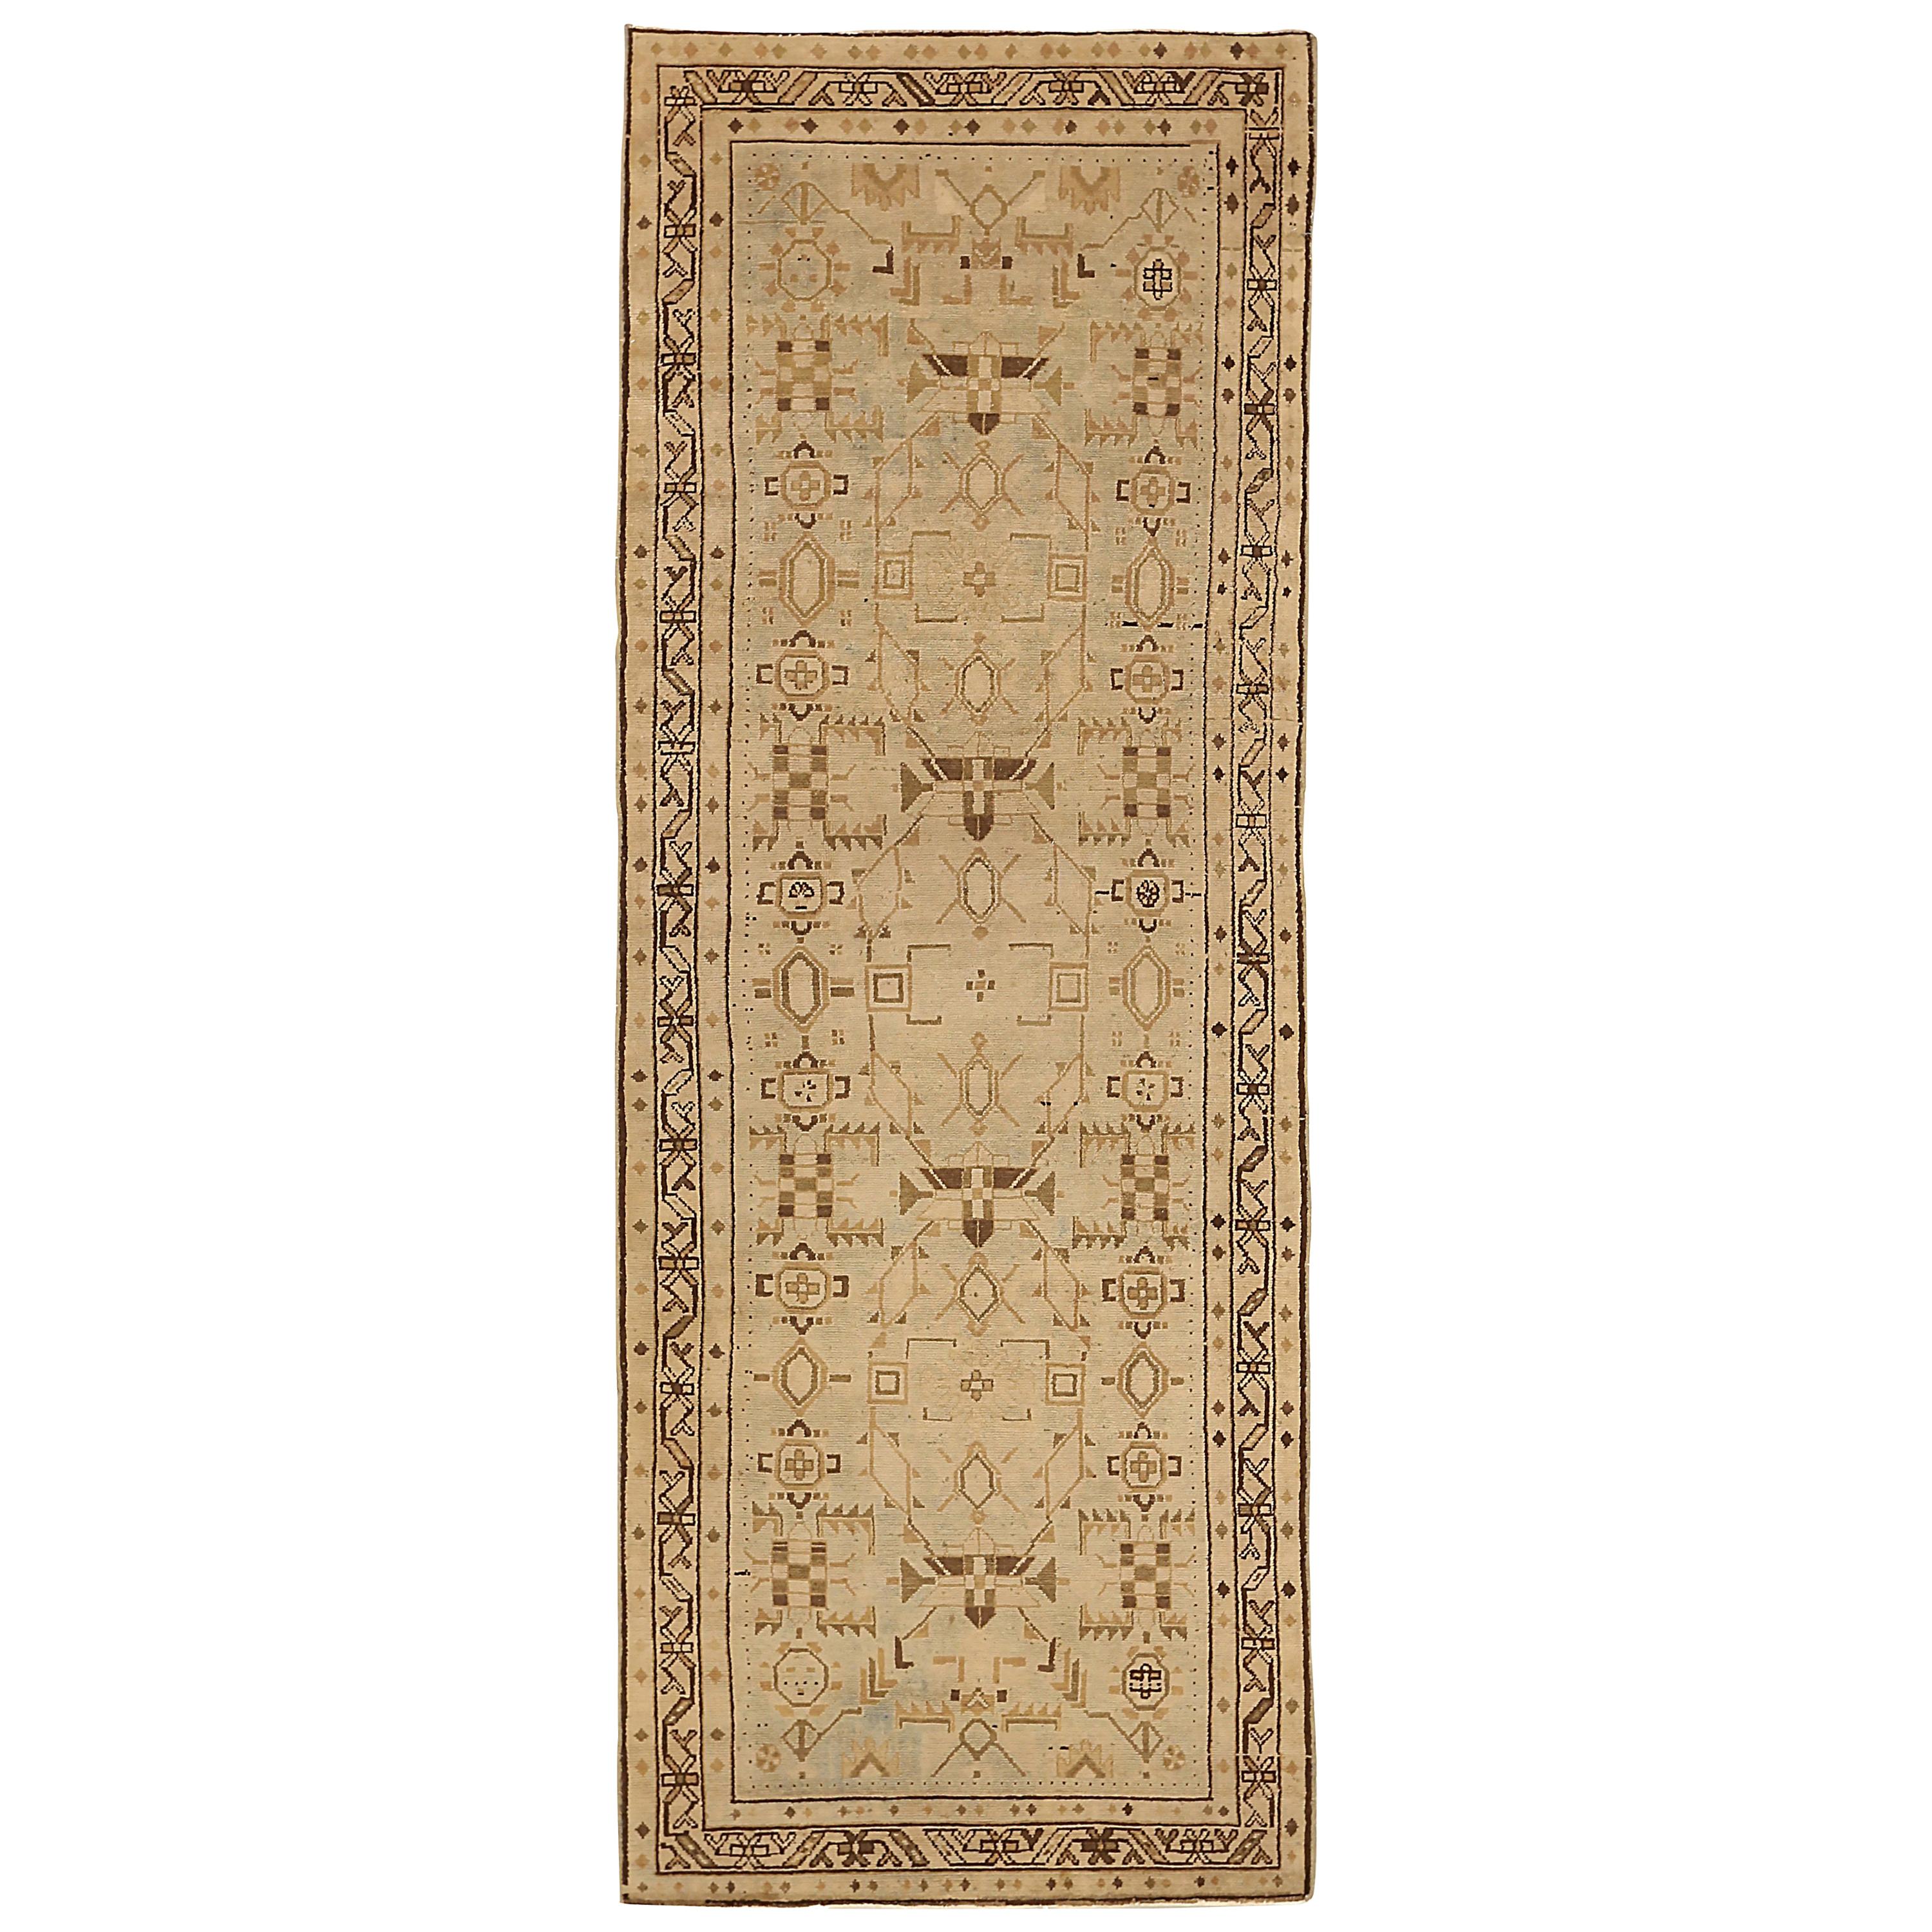 Antique Persian Shahsavan Runner Rug with Geometric Details on Ivory Field